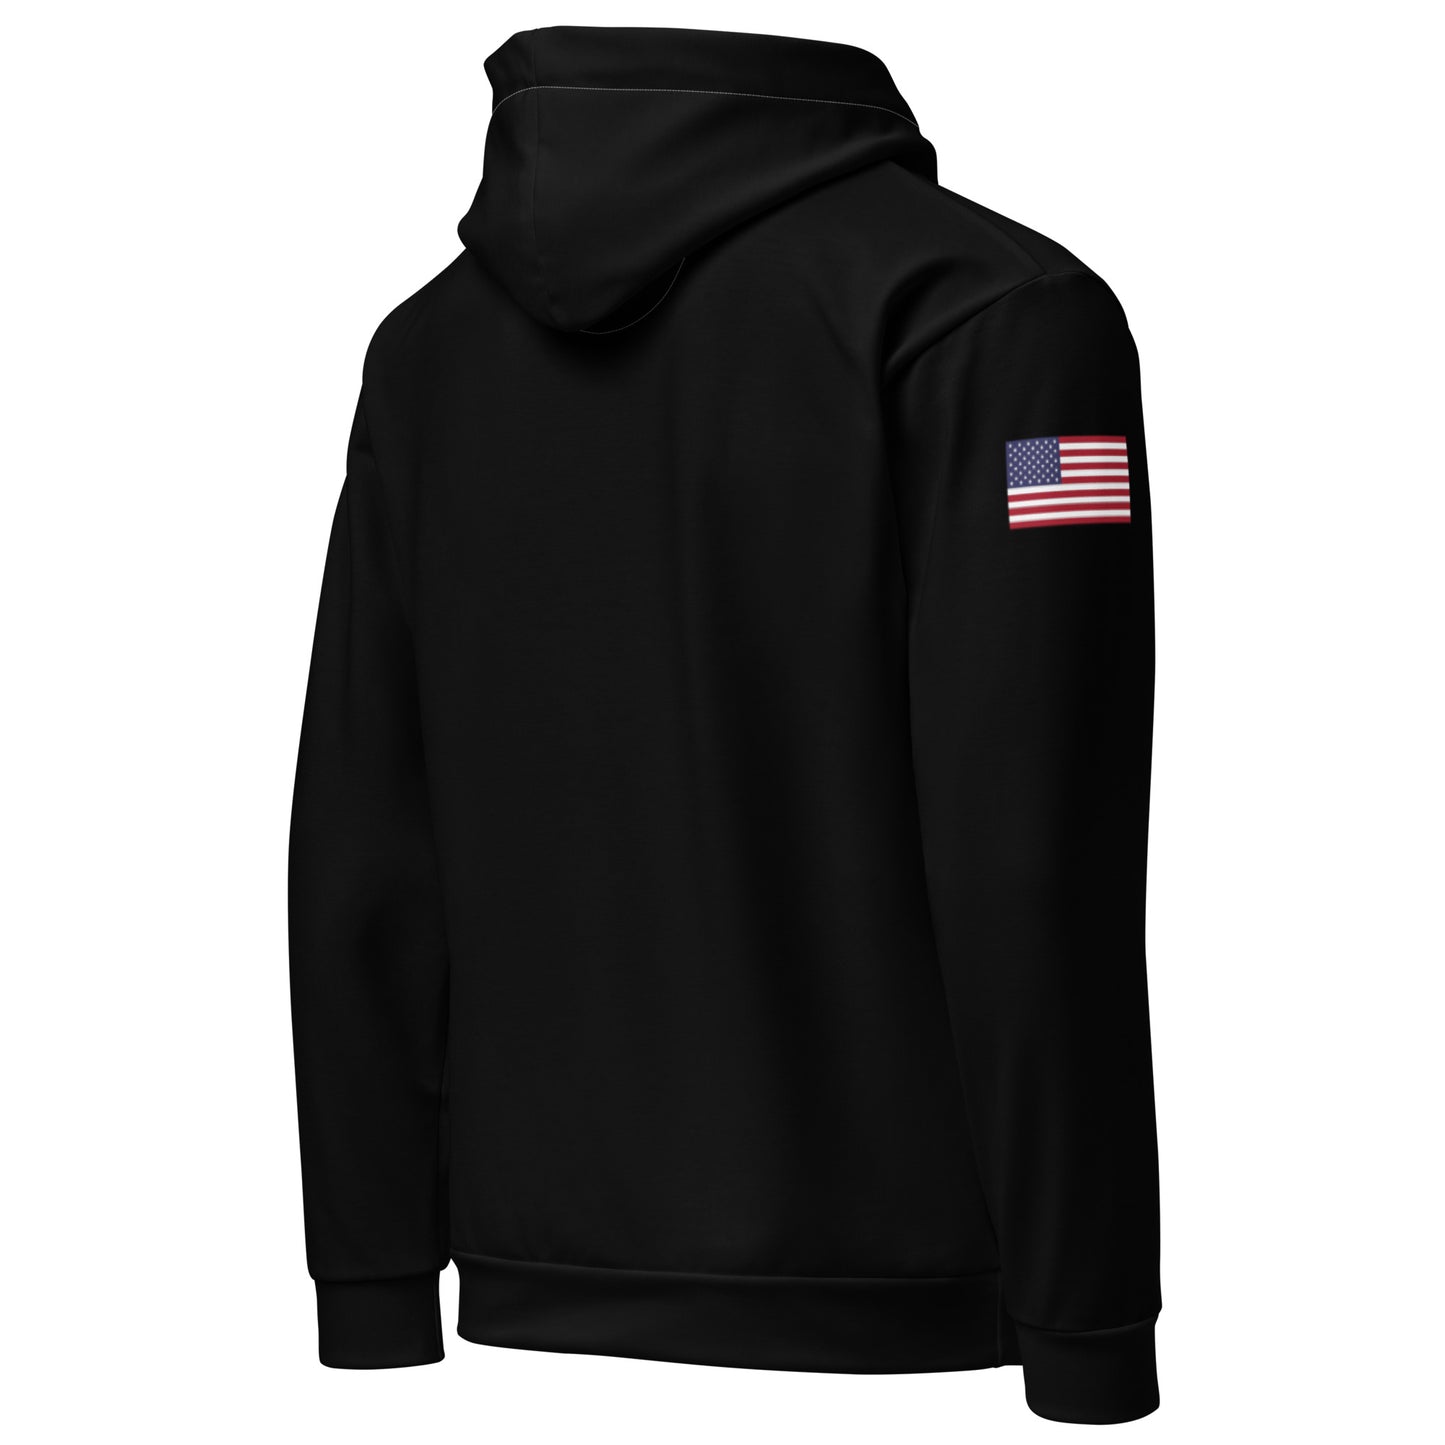 GOONS USA I MIDWEIGHT Hoodie